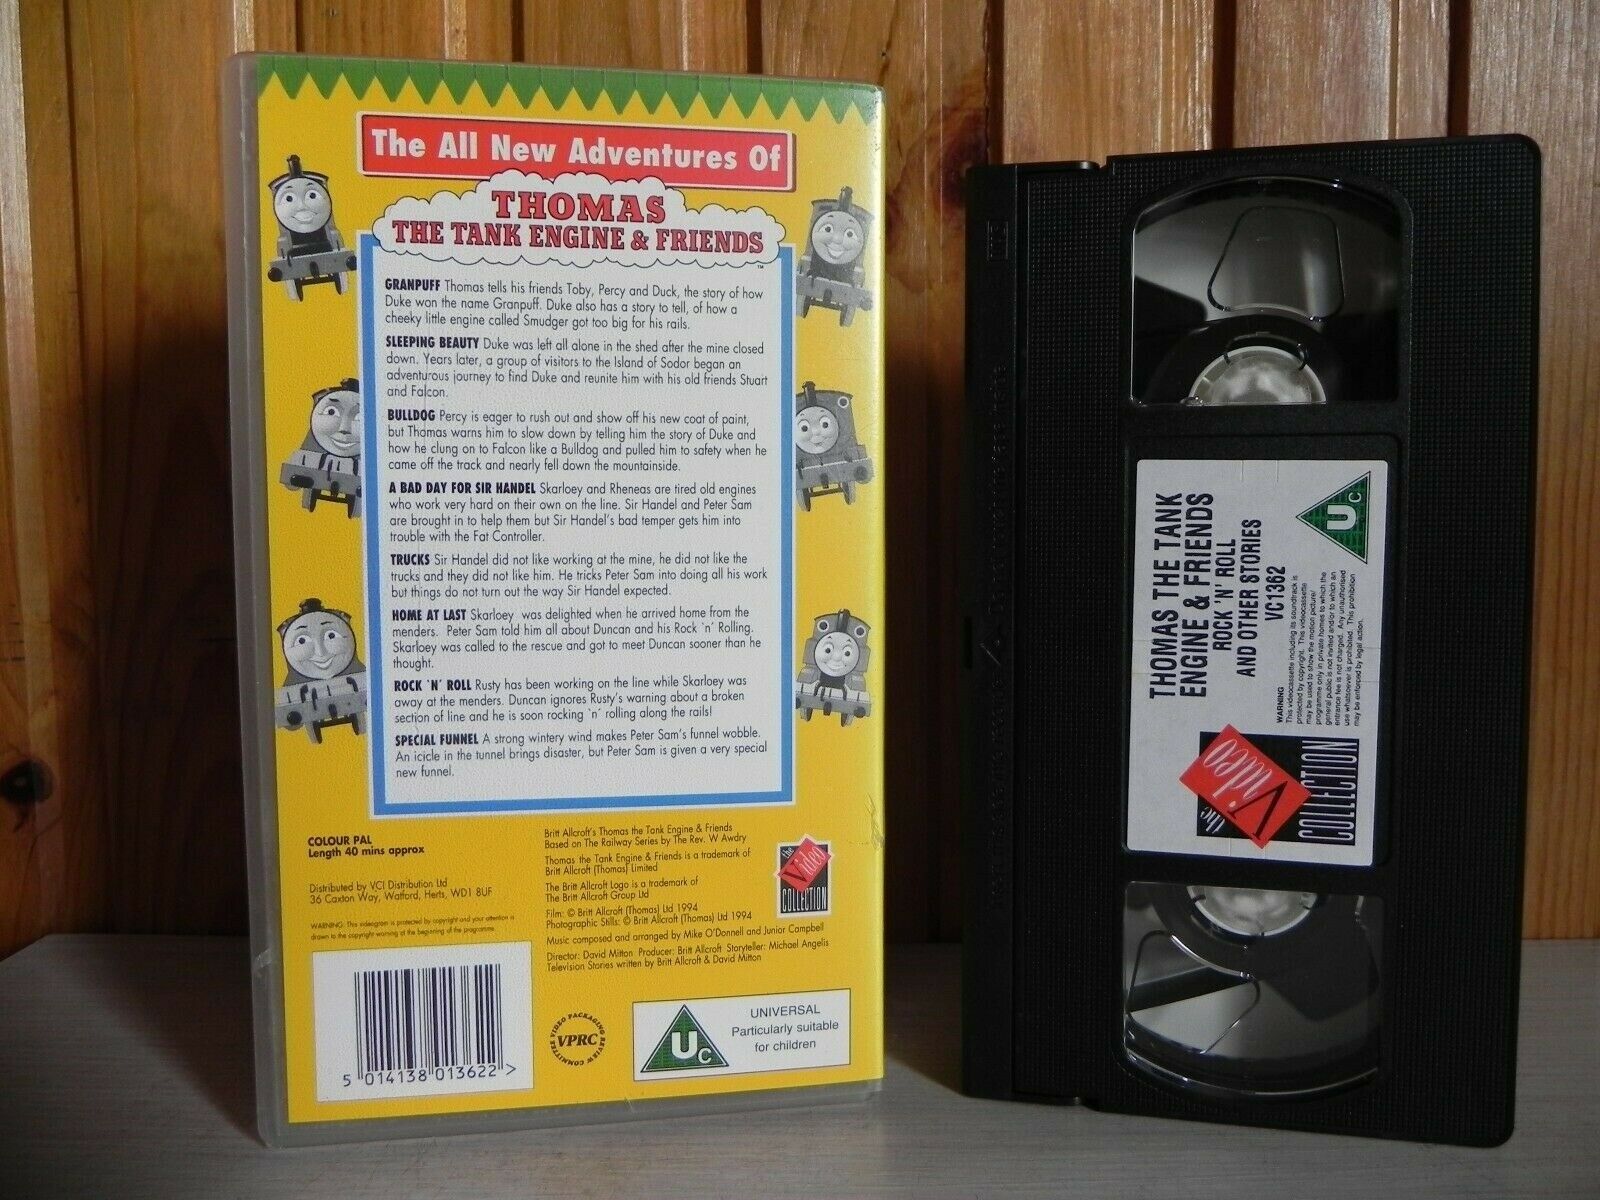 CHILDREN'S VIDEO - THOMAS THE TANK ENGINE - ROCK'N'ROLL & OTHERS - 1362 KIDS VHS-